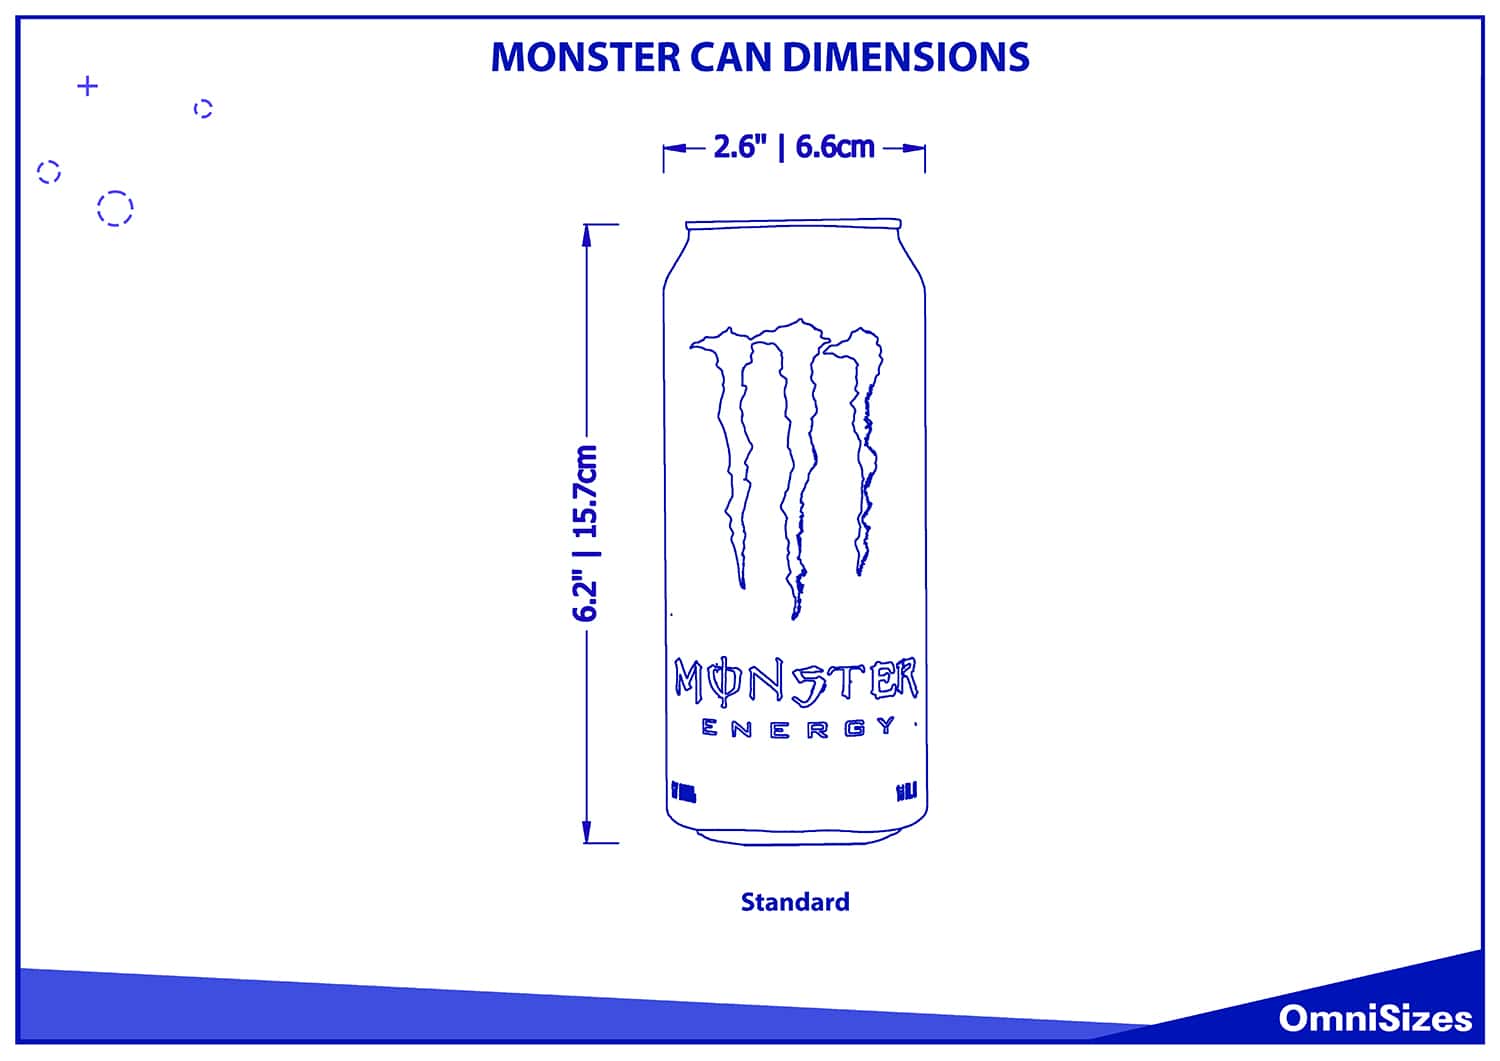 Monster can dimensions